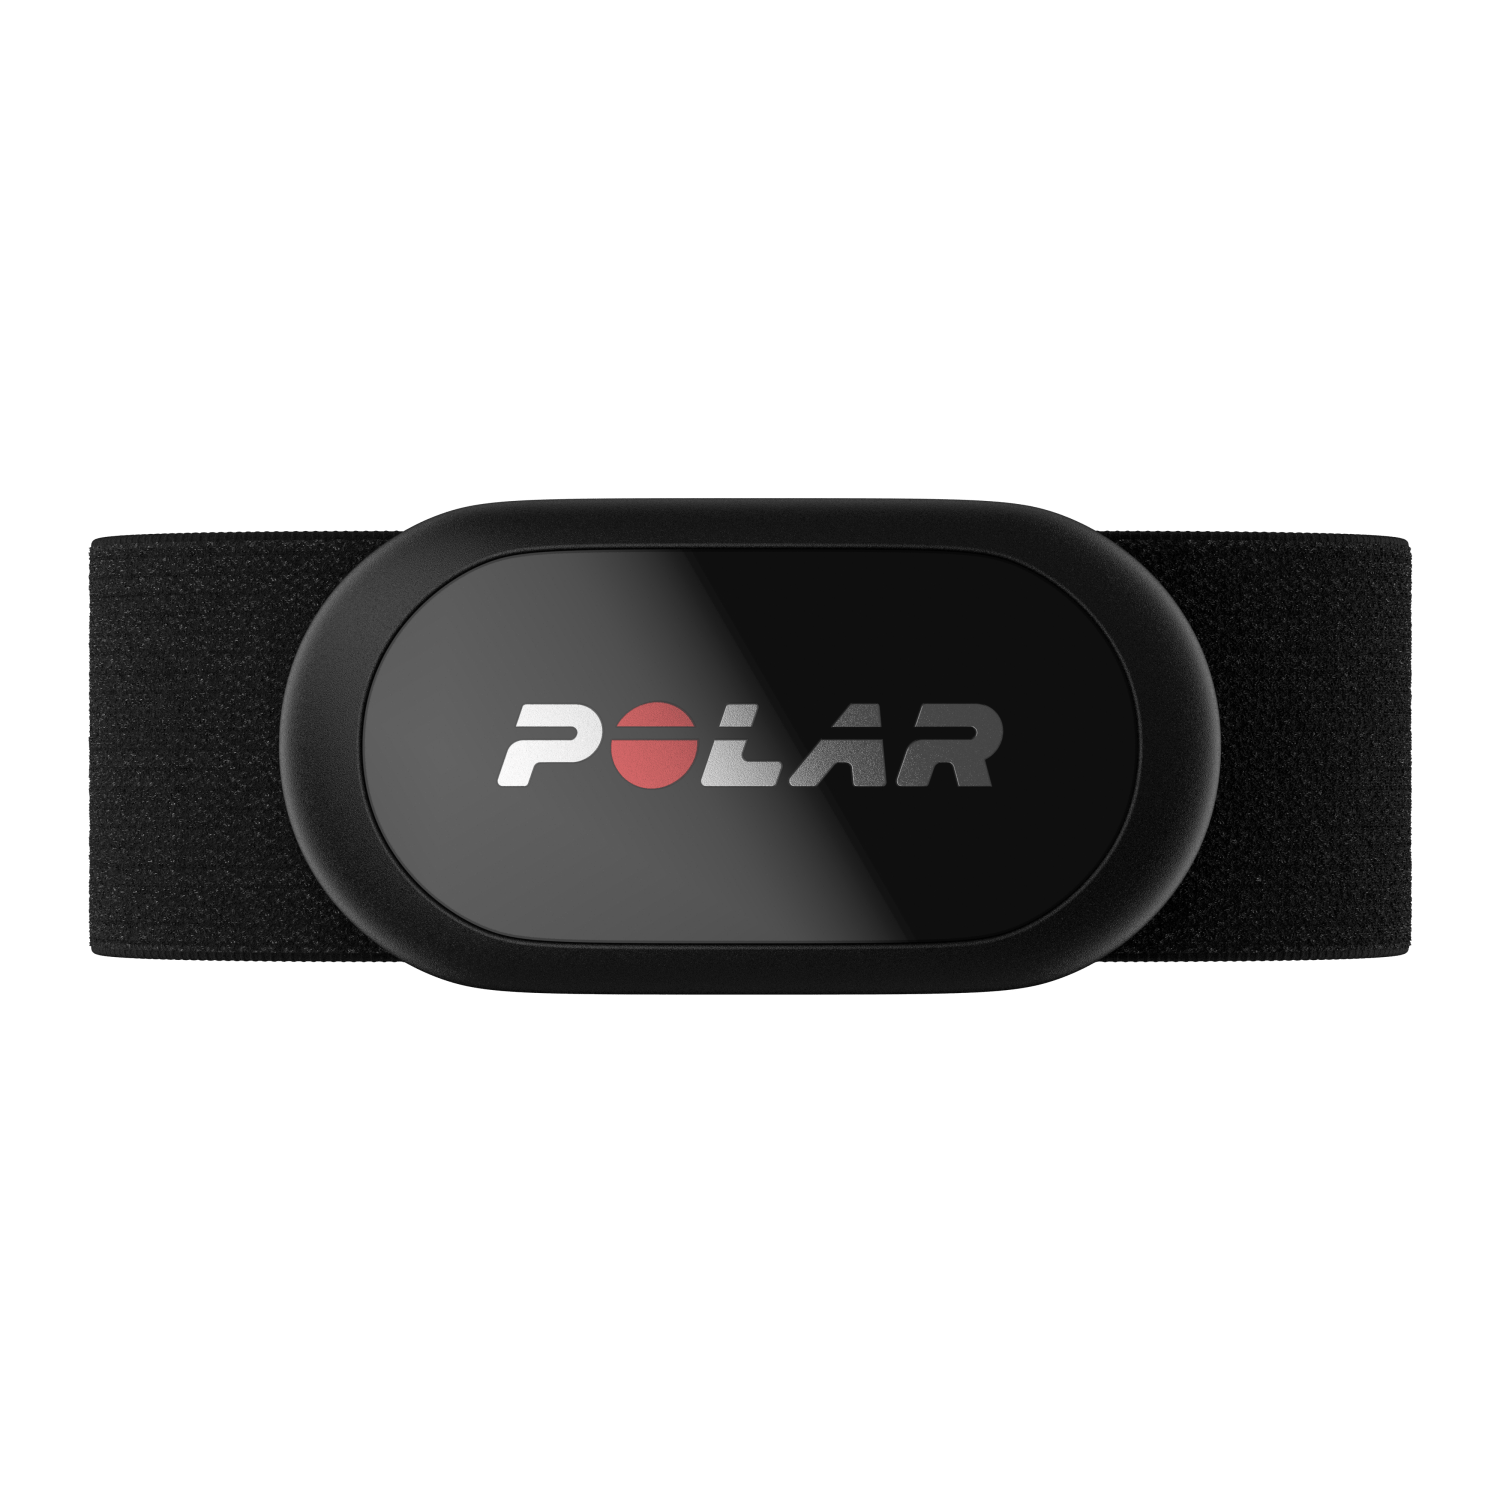 Polar H10 Heart Rate Monitor – ANT+ , Bluetooth – HR Sensor for Men and Women – Built-in Memory - image 2 of 5